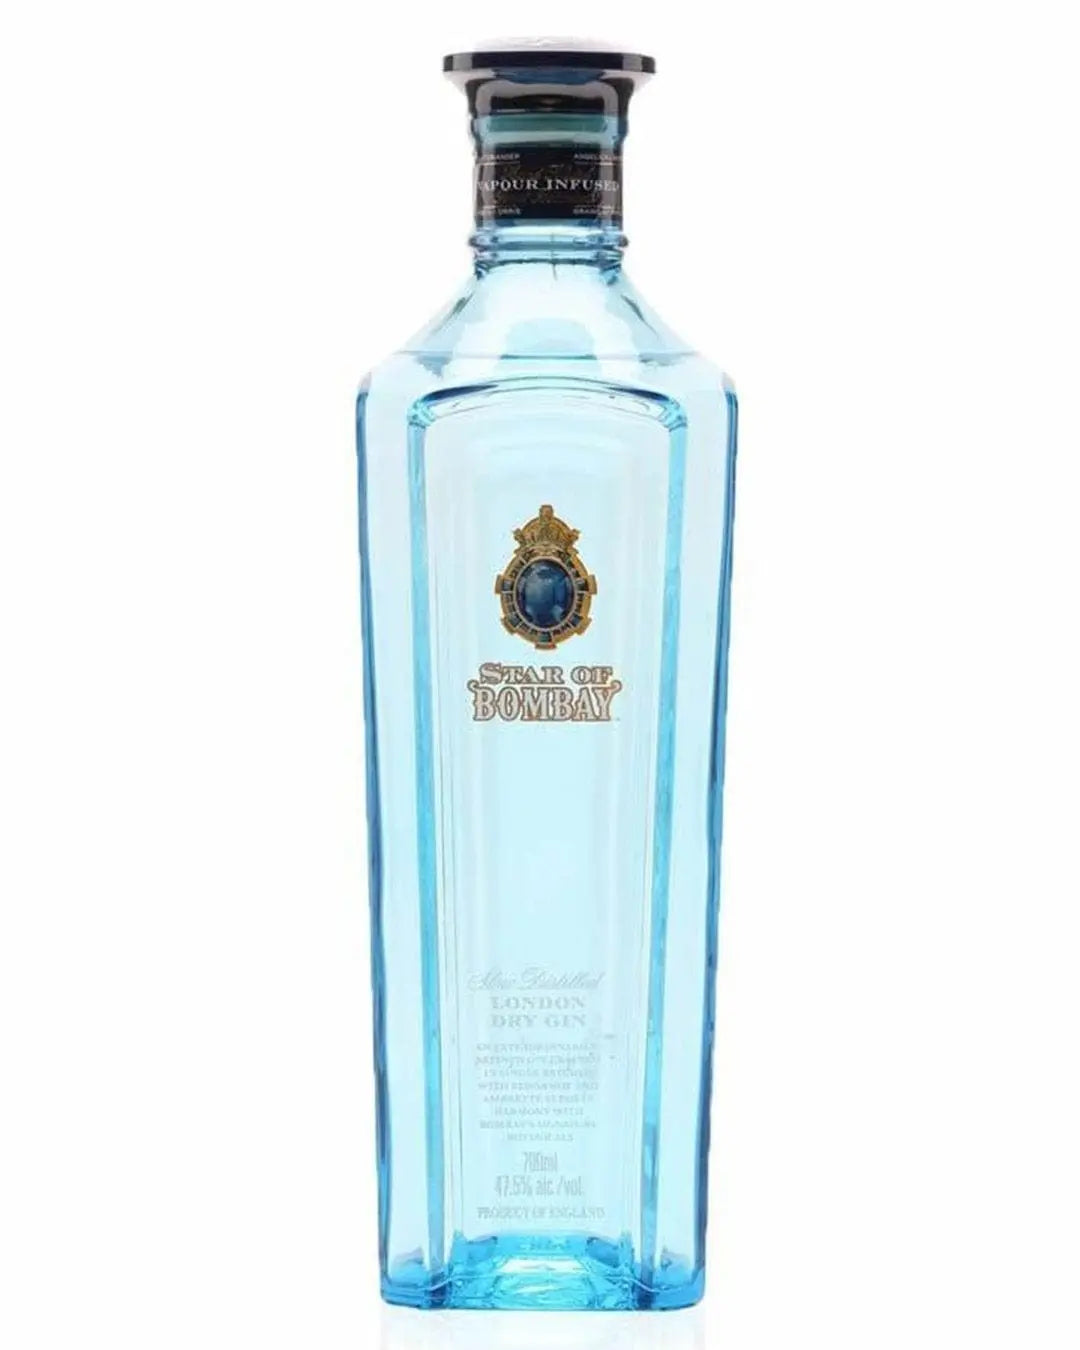 Star Of Bombay London Dry Gin, 70 cl Gin 5010677360074